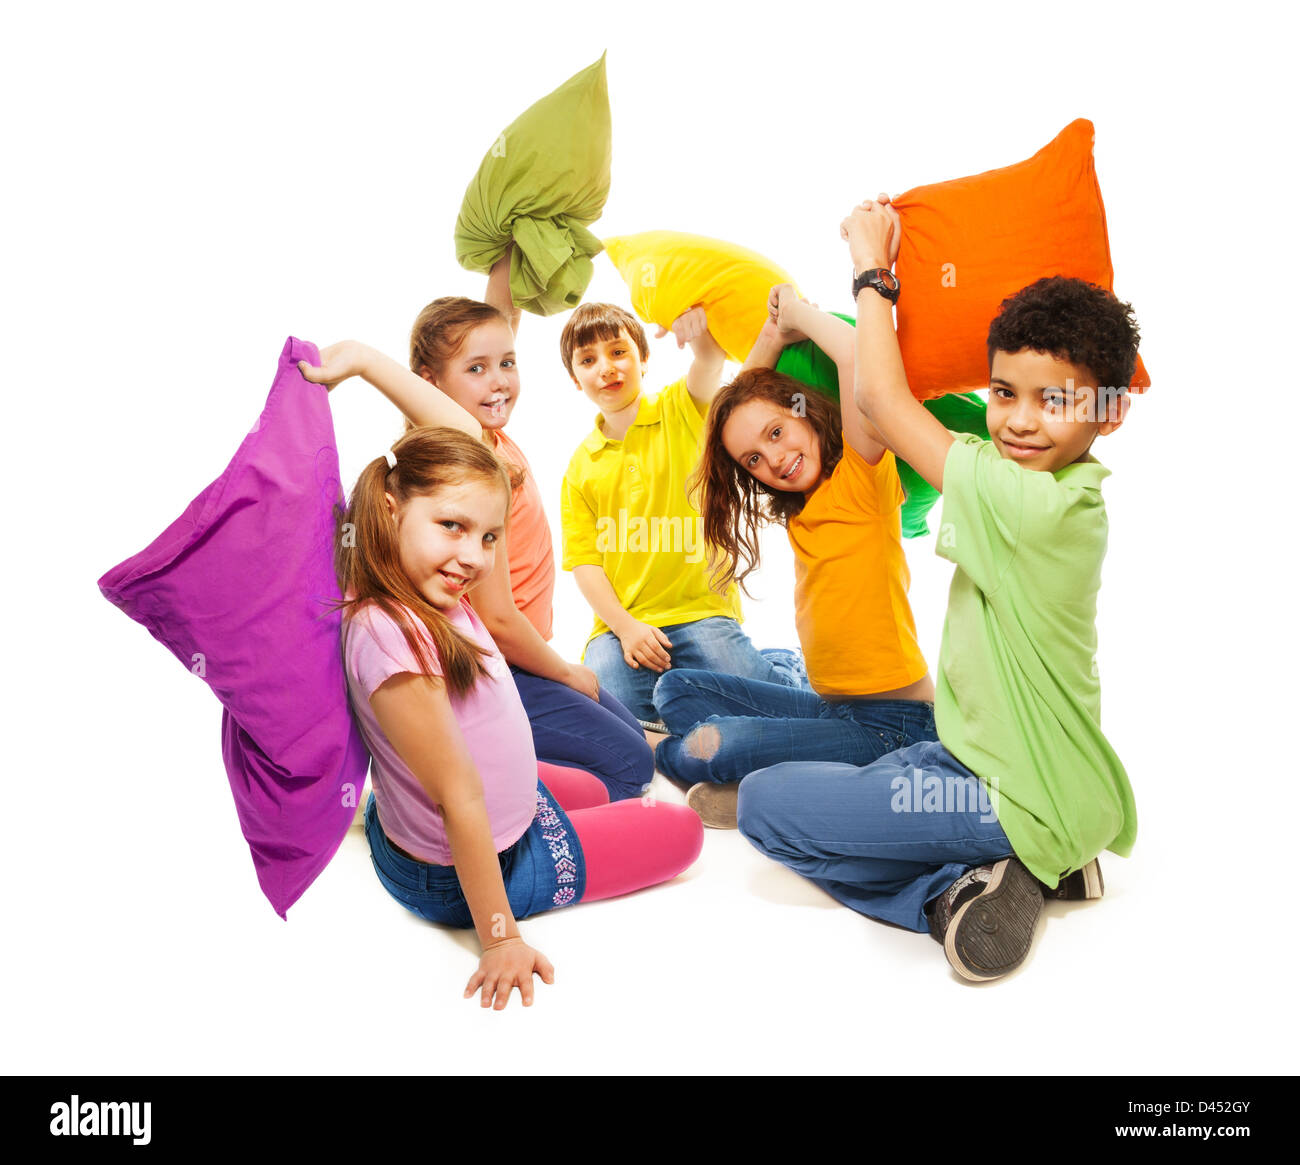 Happy five teen kids, diversity looking, boys and girls fighting with pillows, laughing and having fun, isolated on white Stock Photo